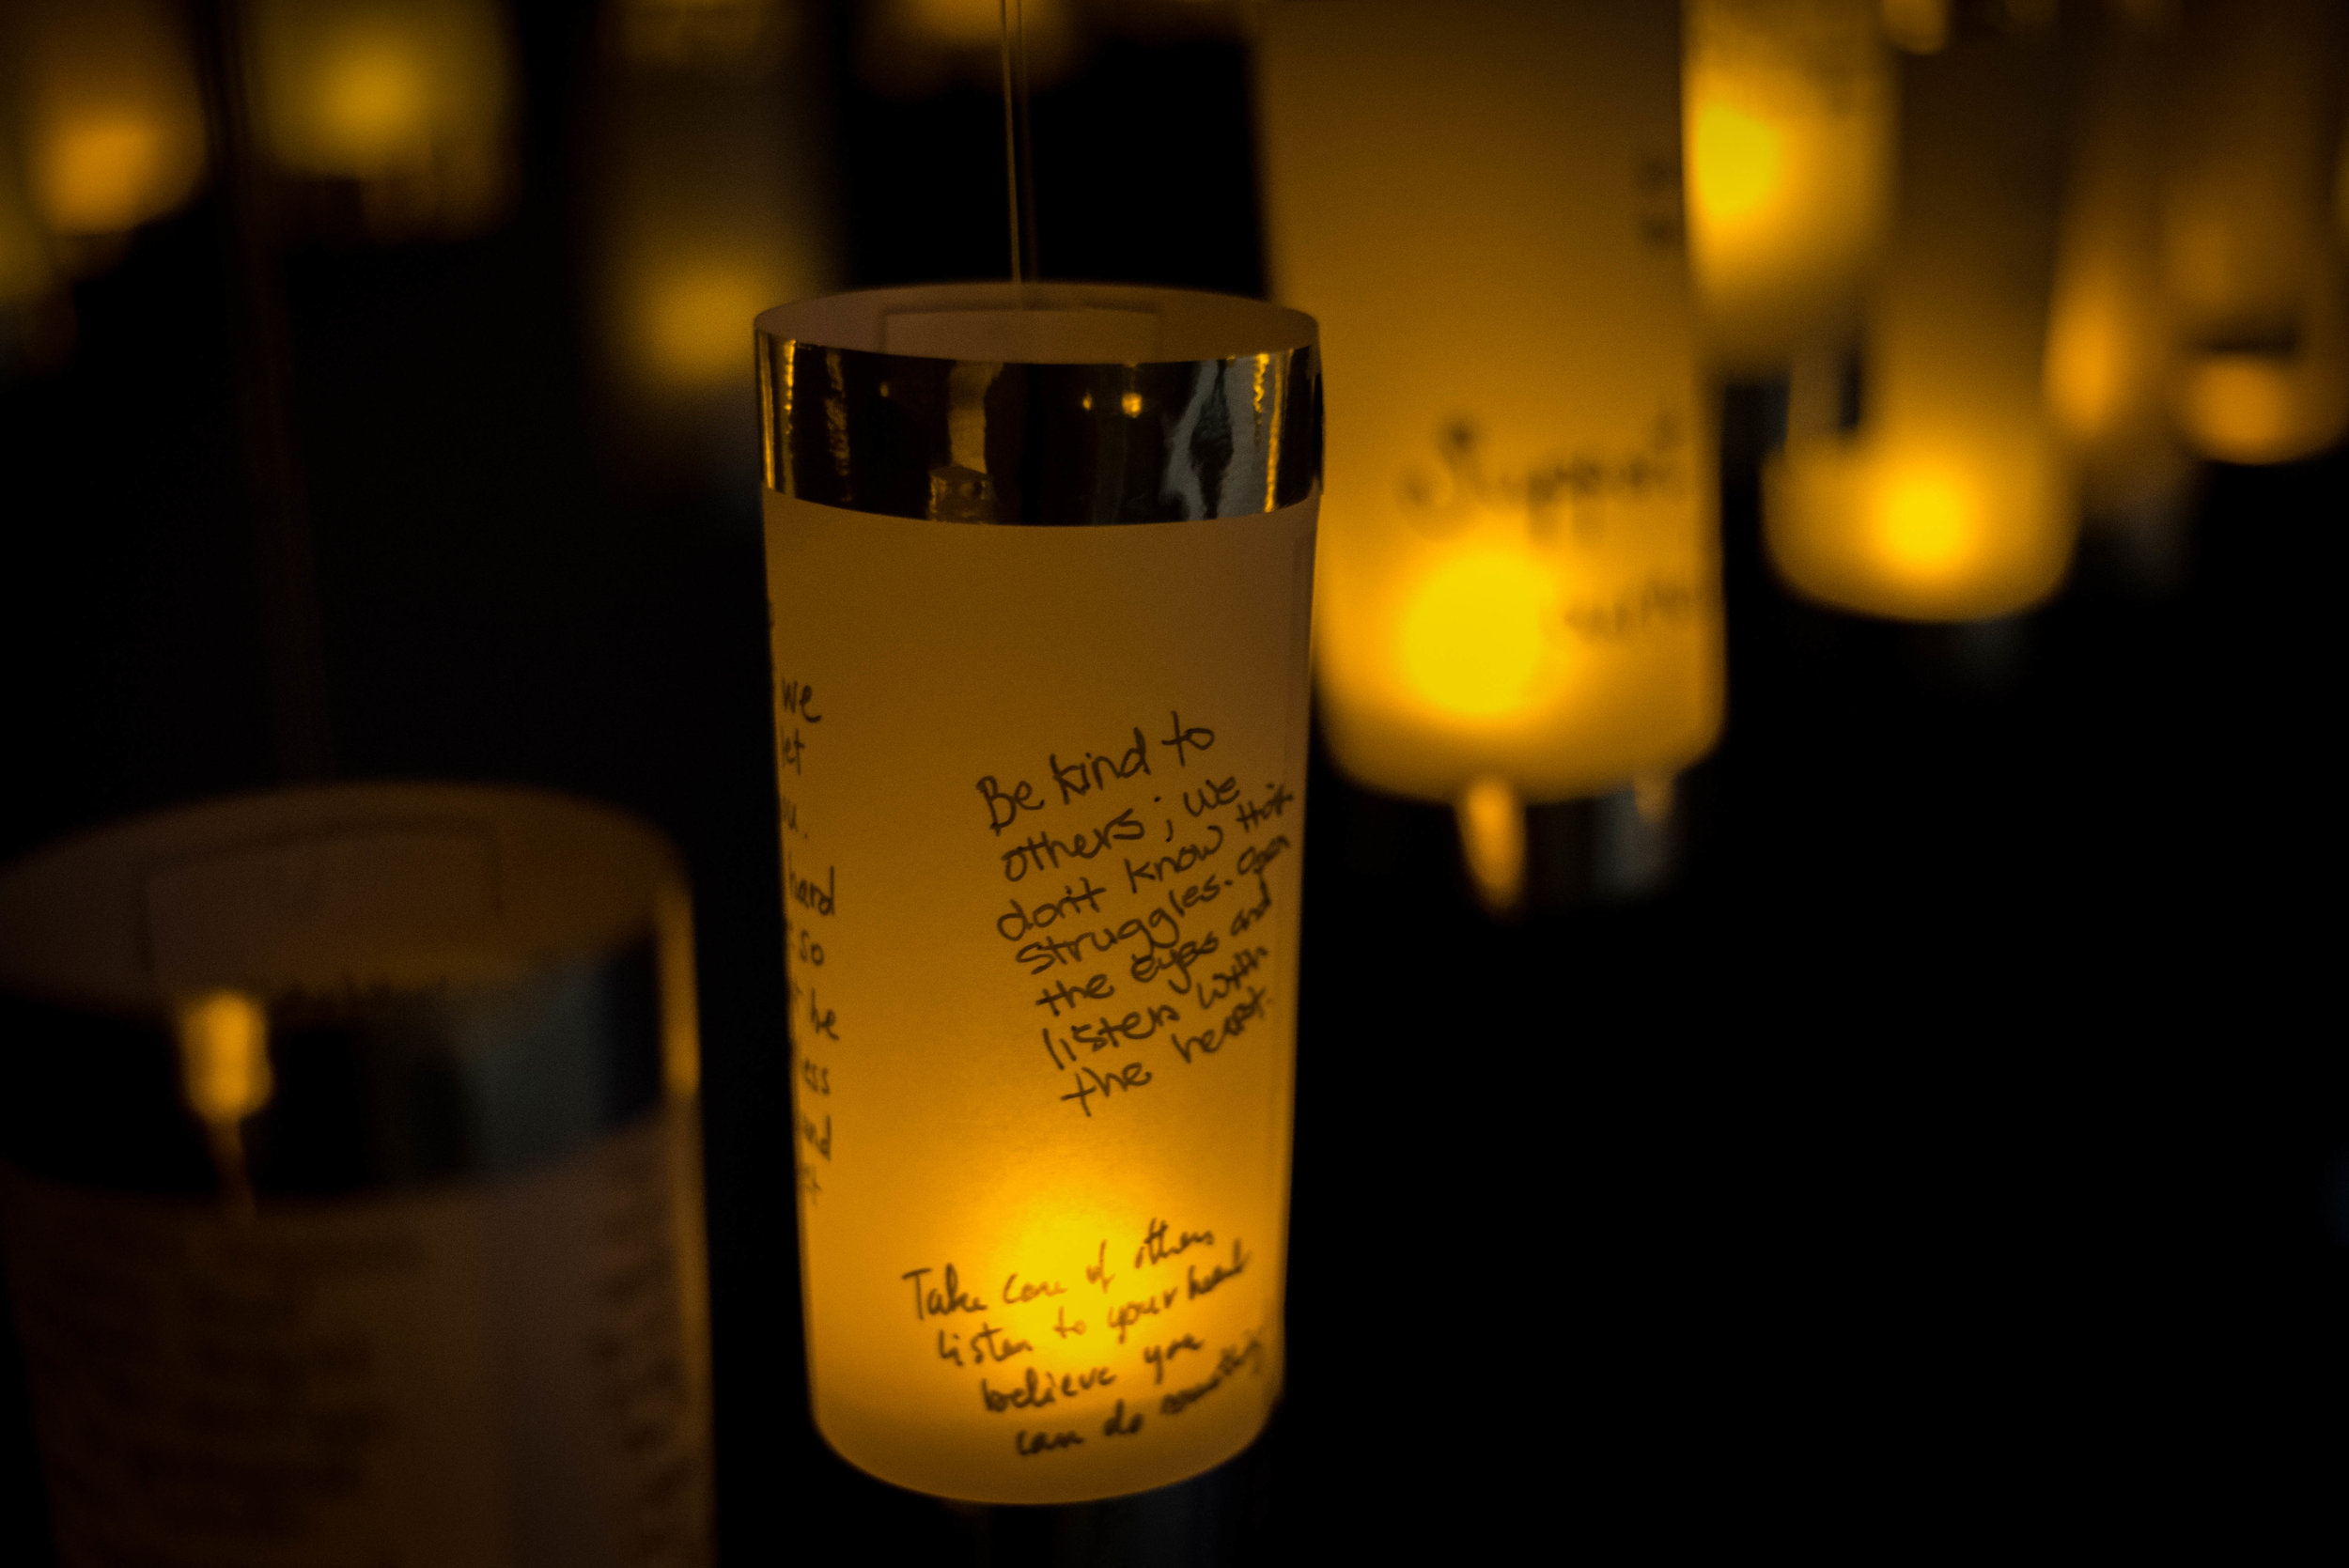 Lanterns for Peace at FiveMyles Gallery